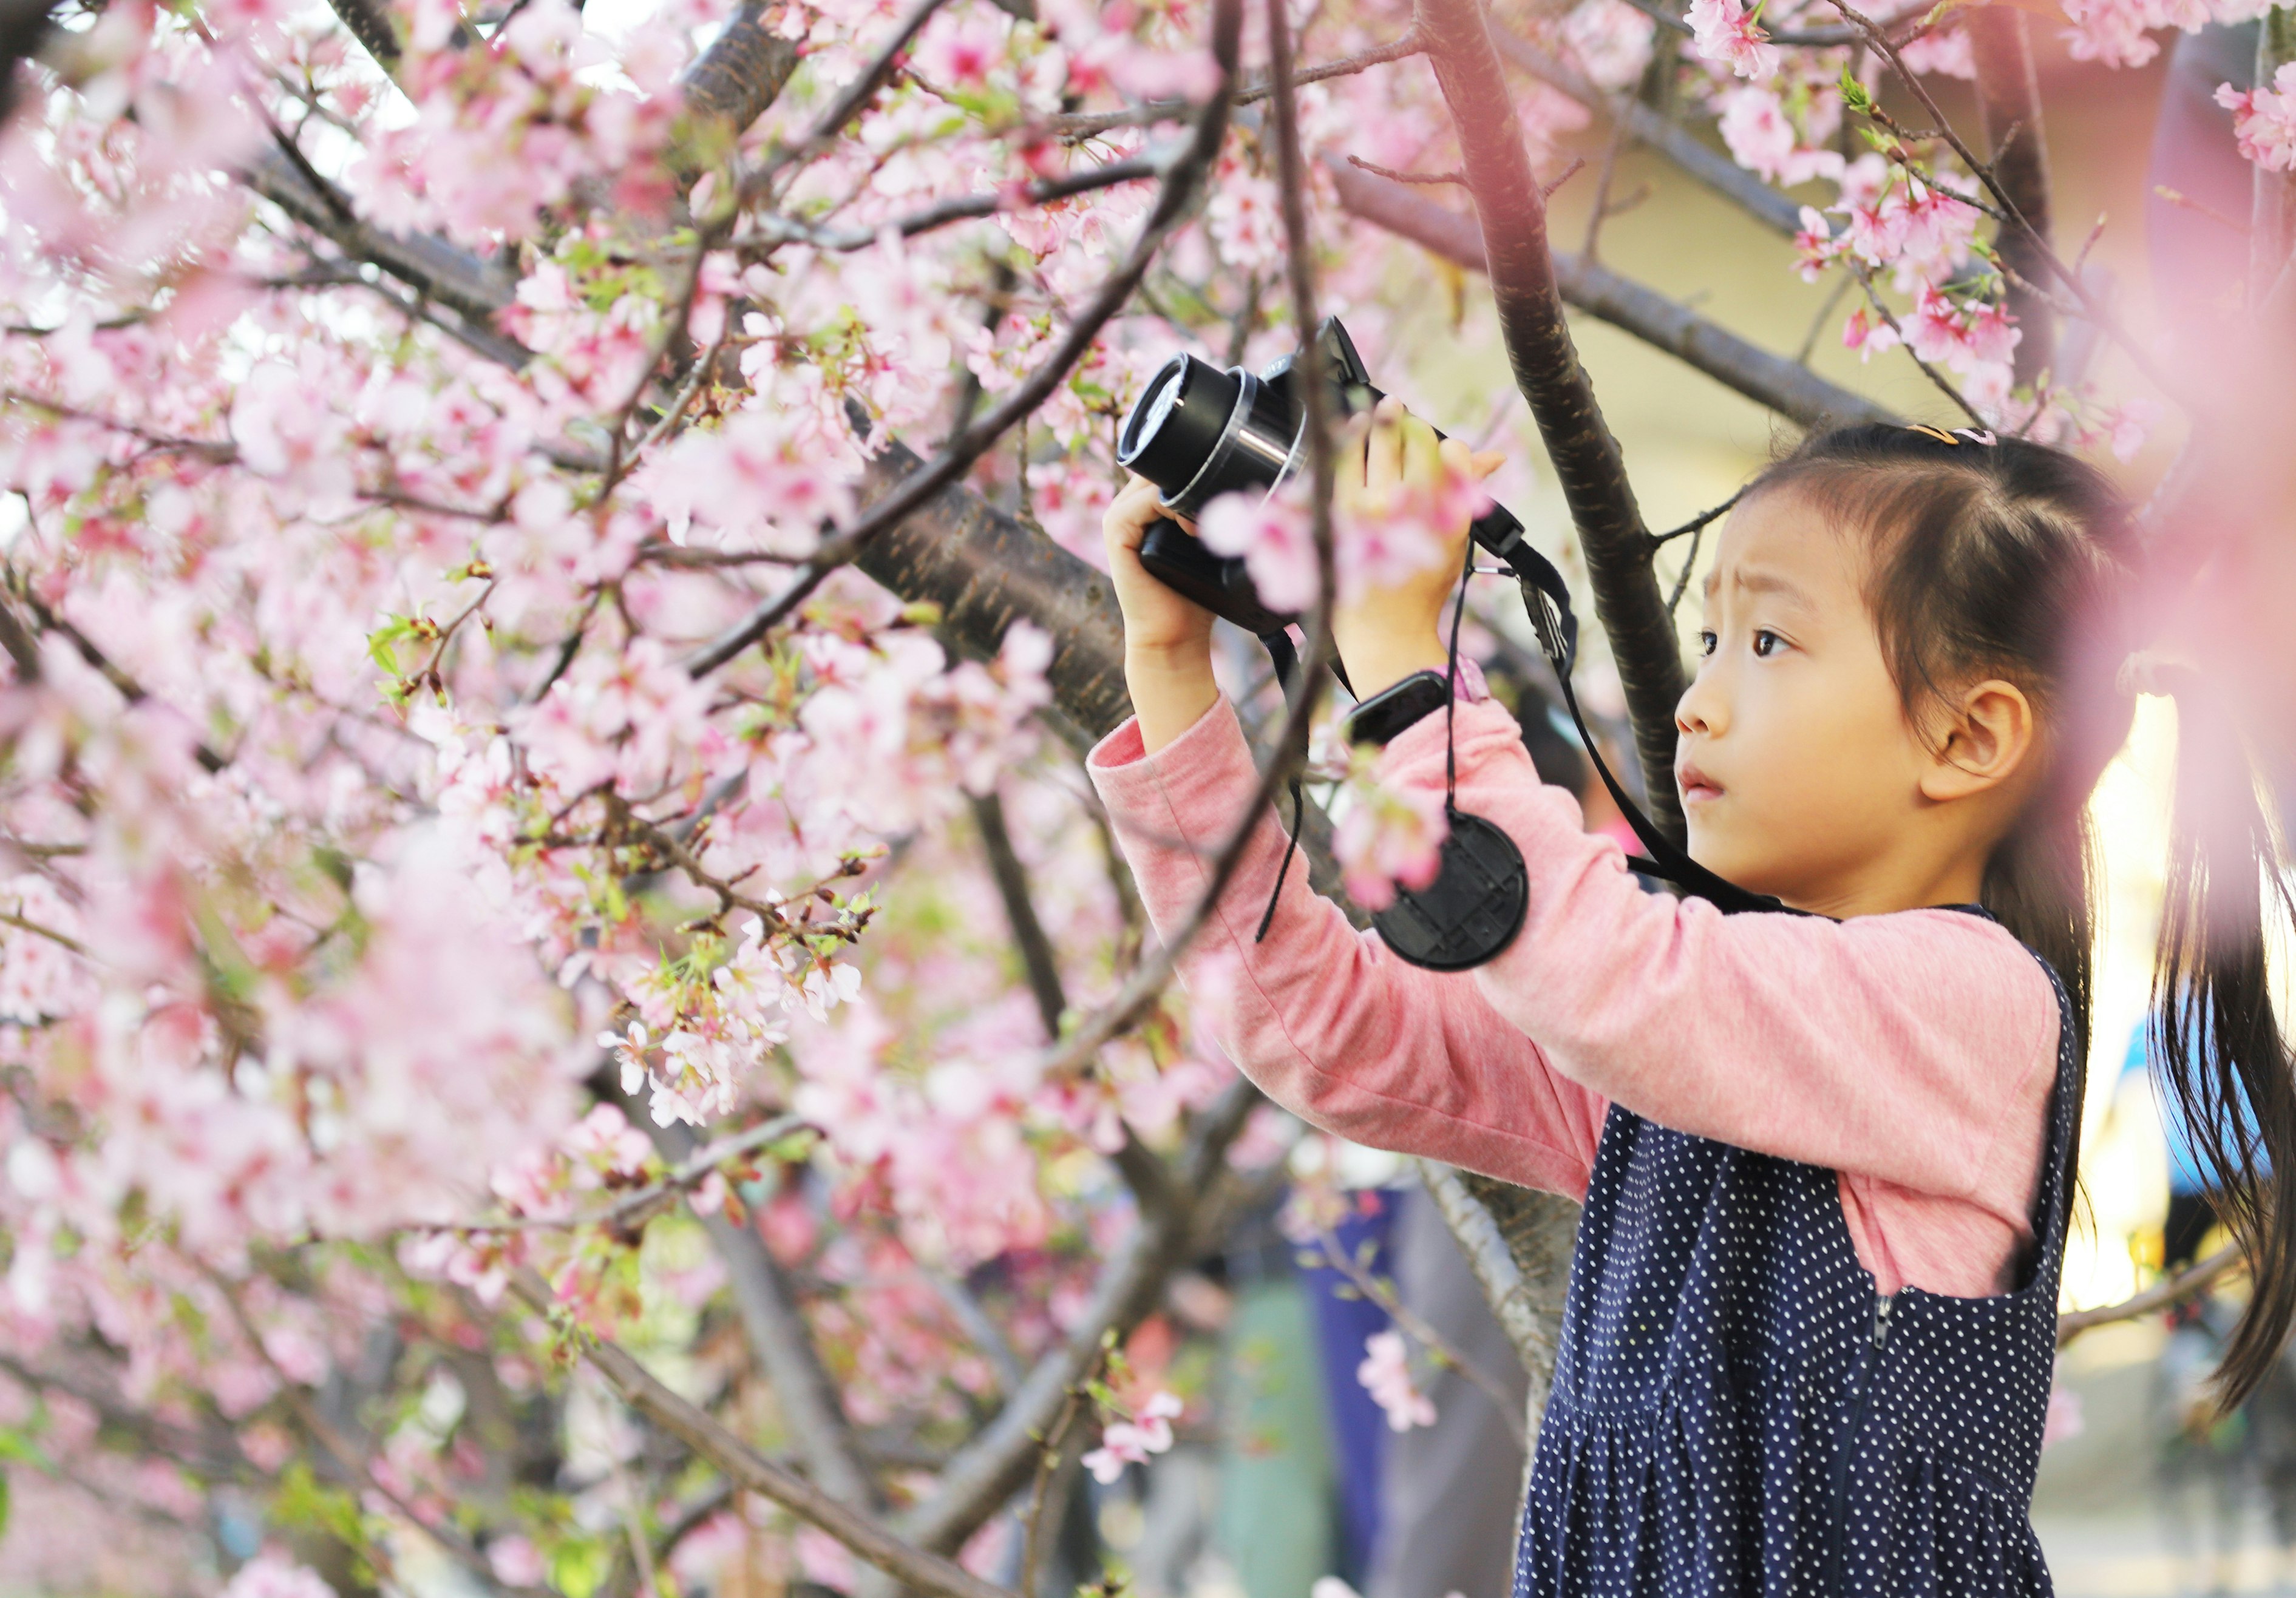 a smiling Asian girl take photos with a digital camera under Cherry trees in taiwan